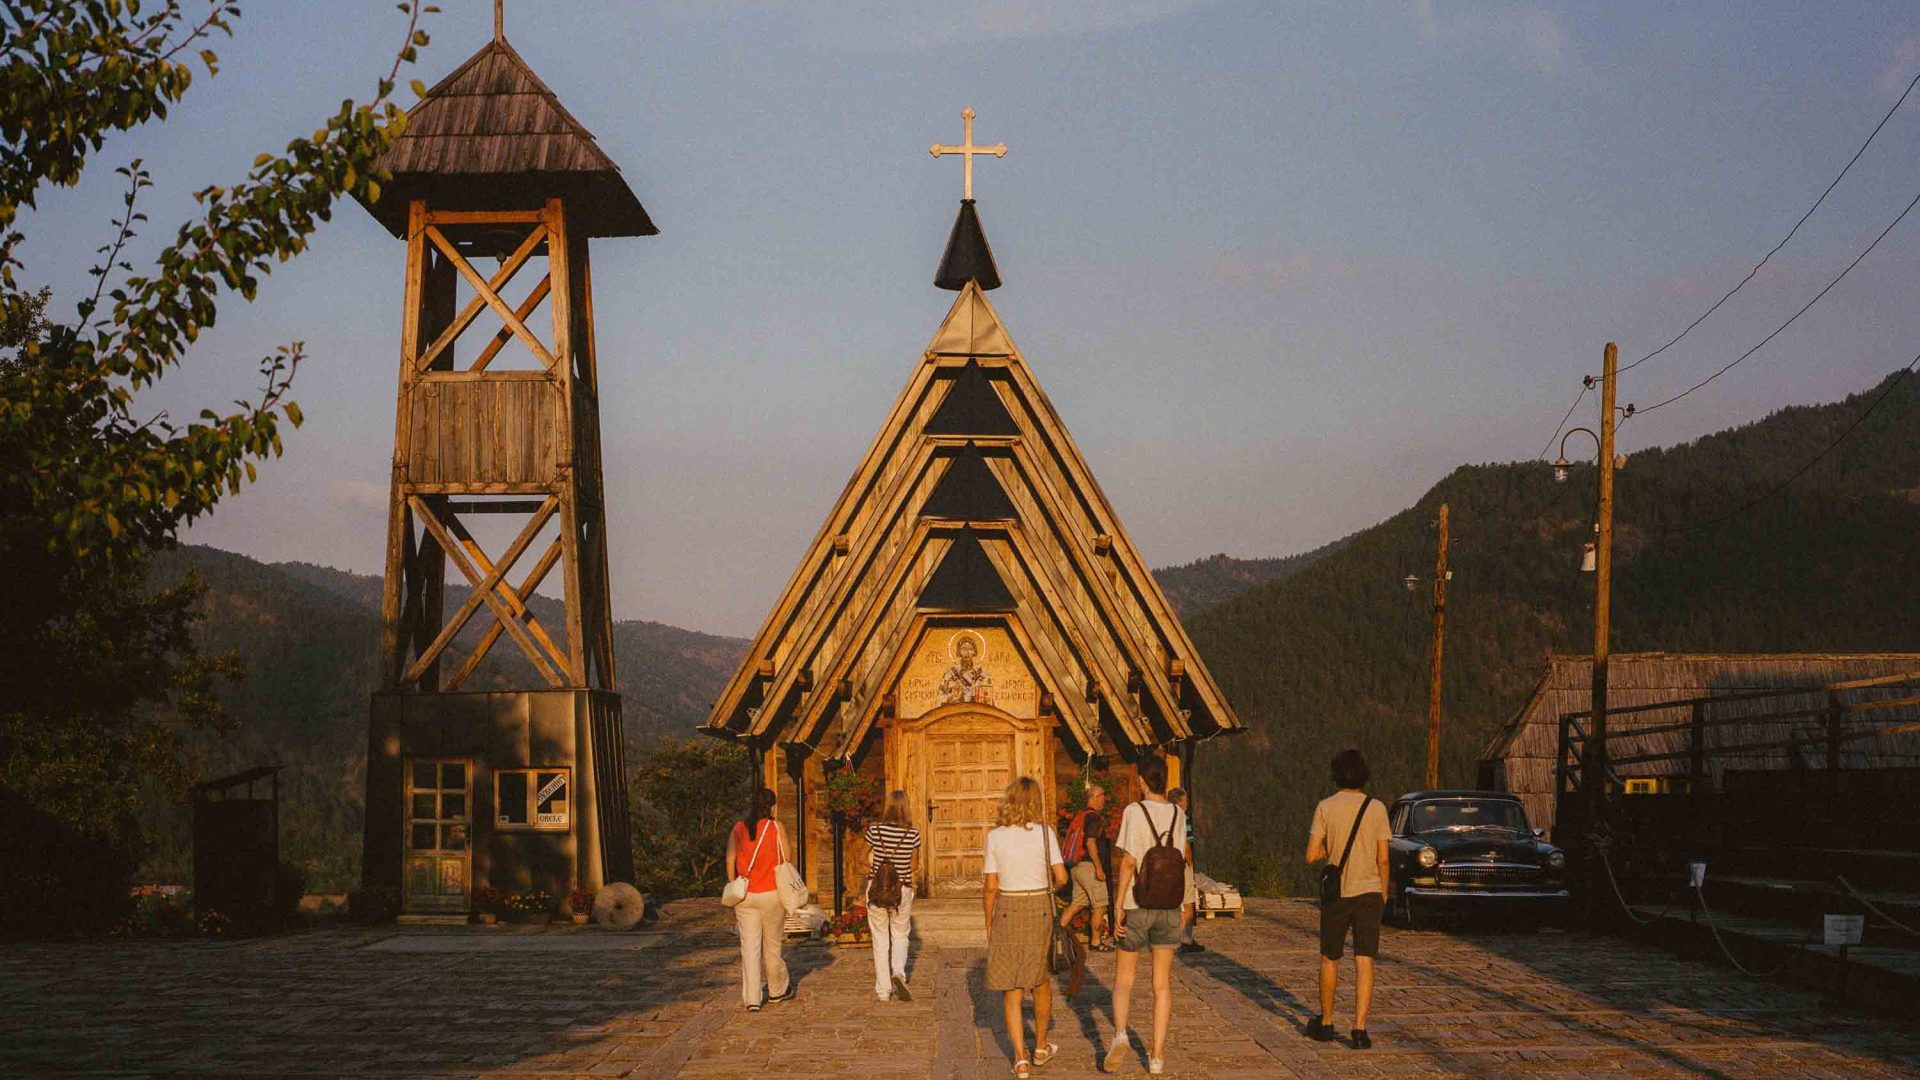 People walk toward the St. Sava Orthodox church, a wooden and triangular structure.